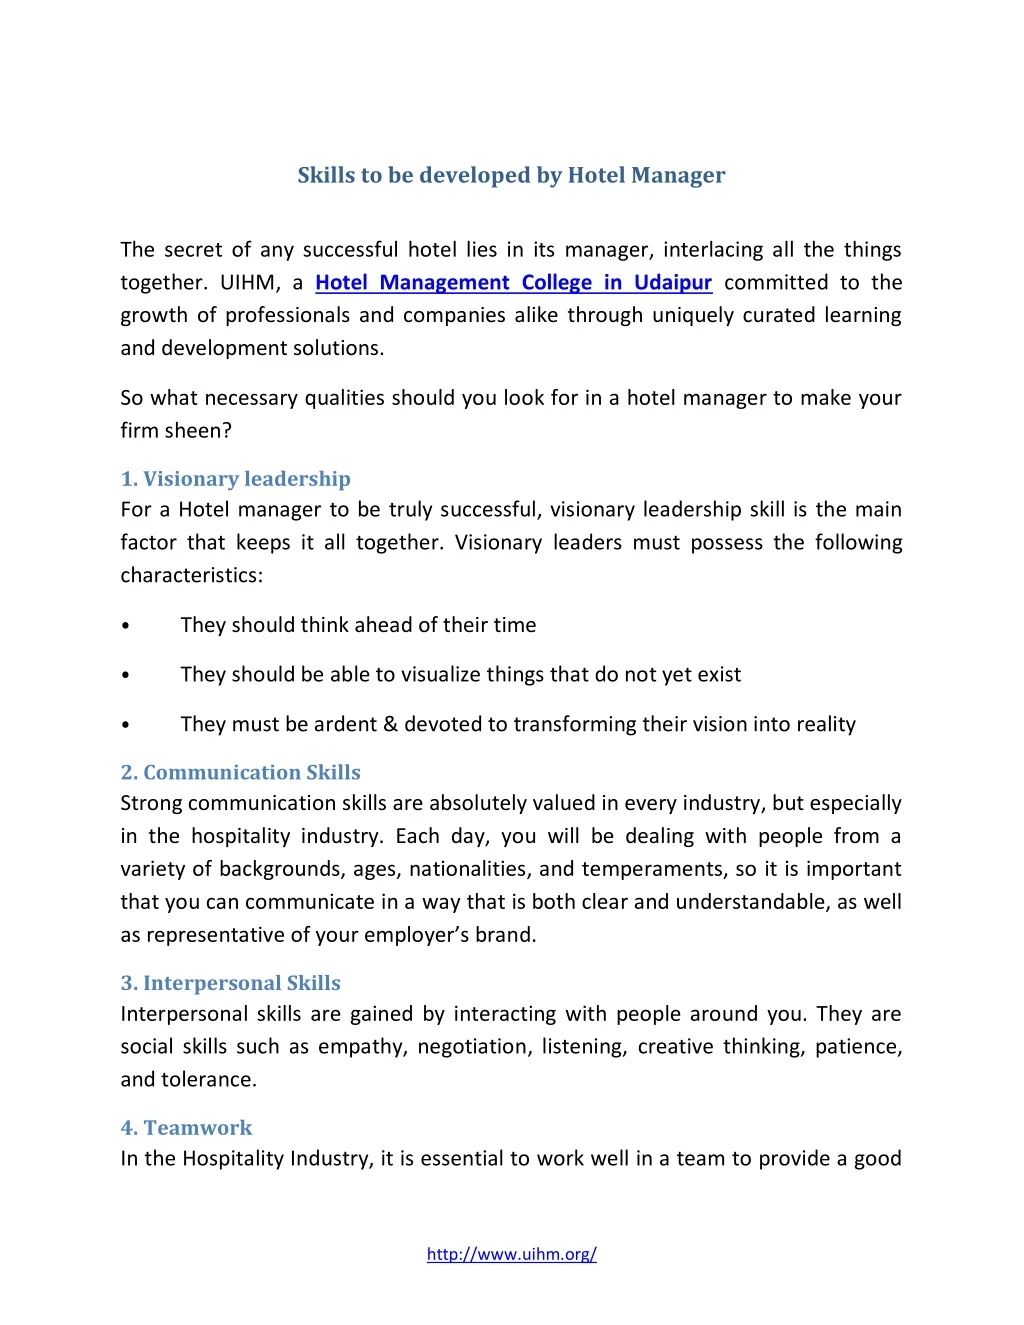 skills to be developed by hotel manager